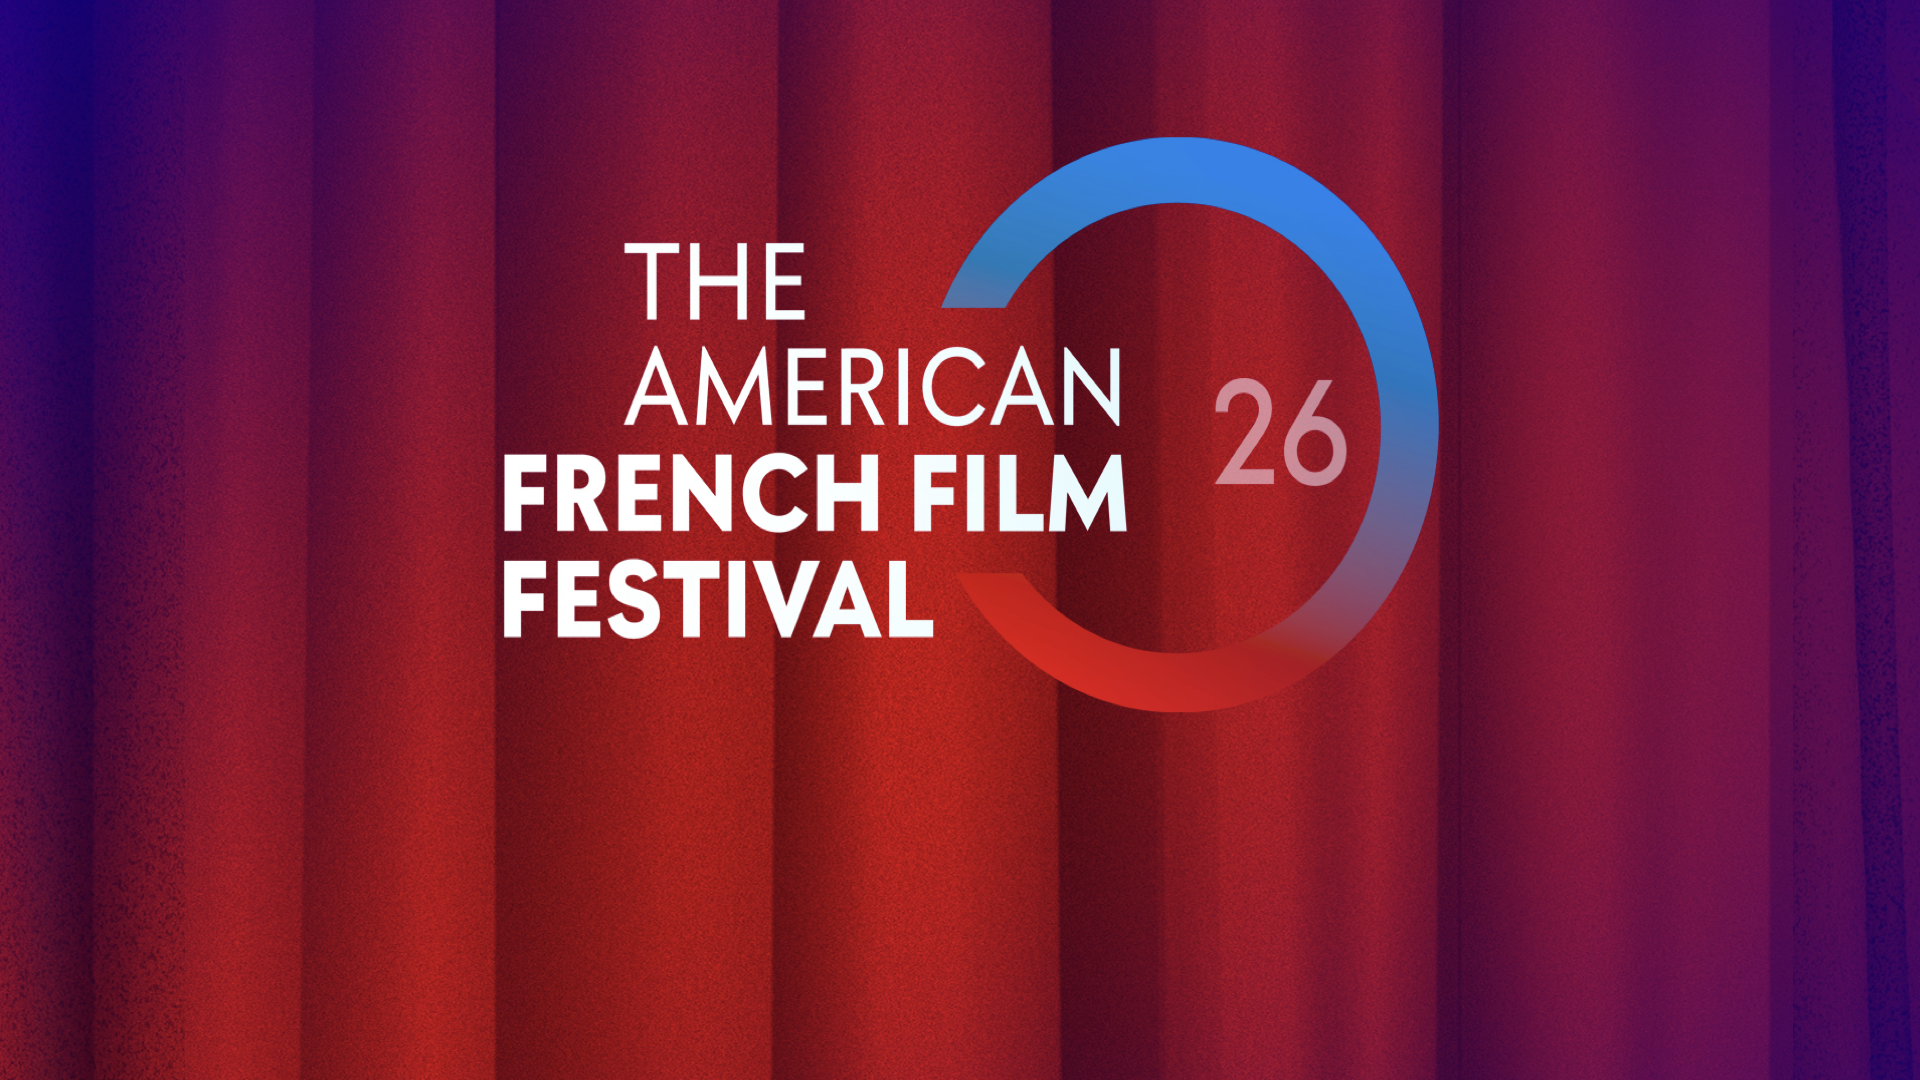 RETURN OF THE HERO – The American French Film Festival in Los Angeles